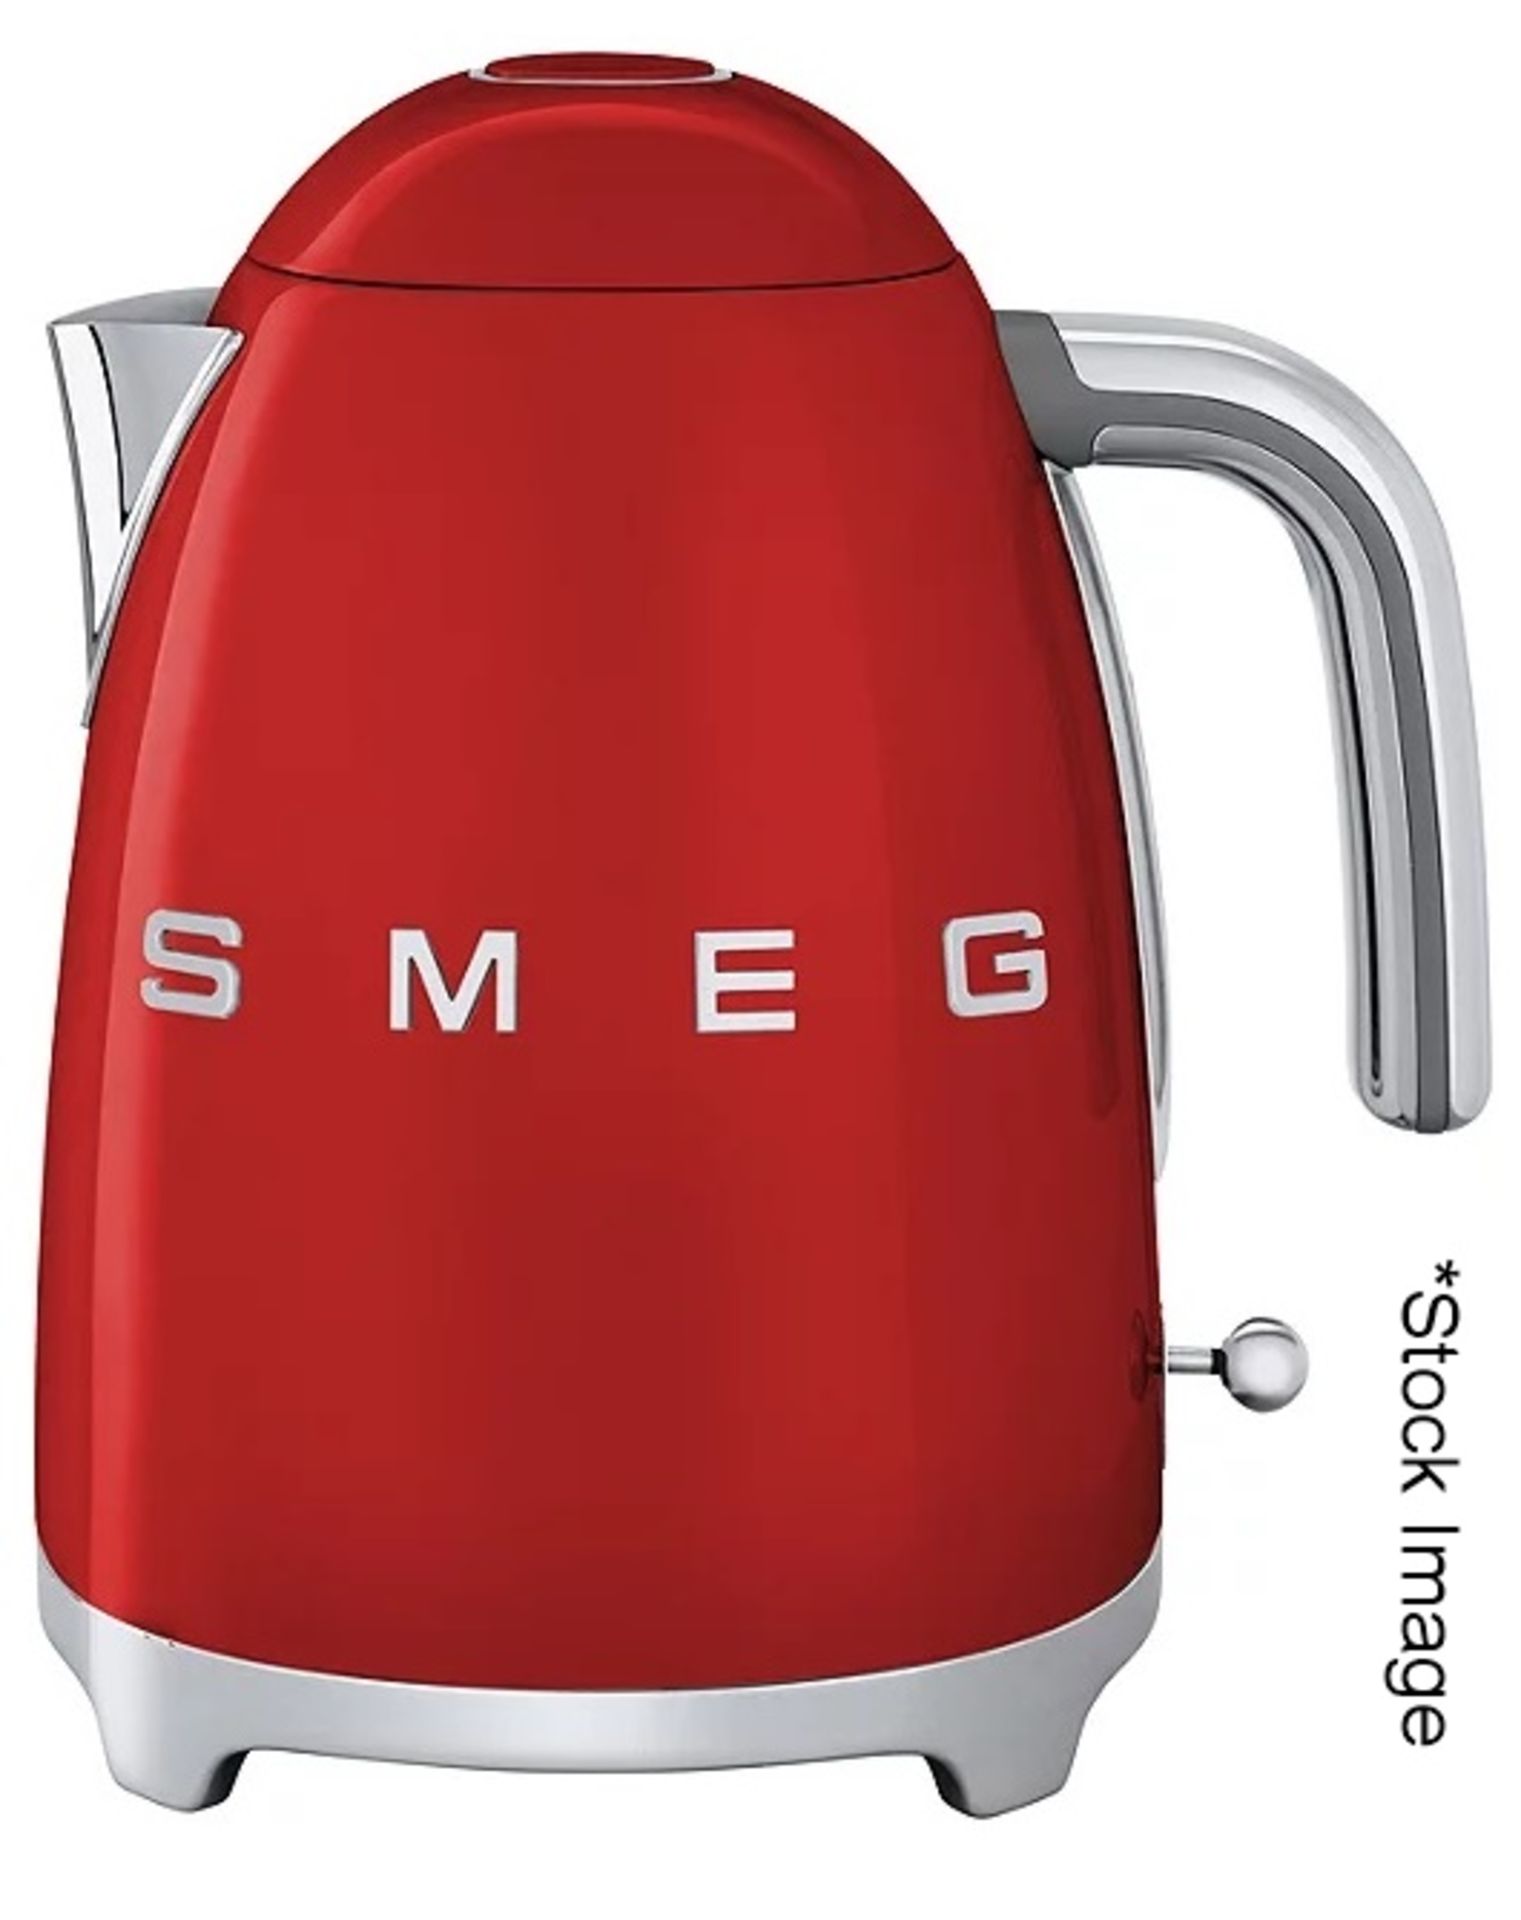 1 x SMEG 'Retro' Kettle In Matte Red Stainless Steel - RRP £159.00